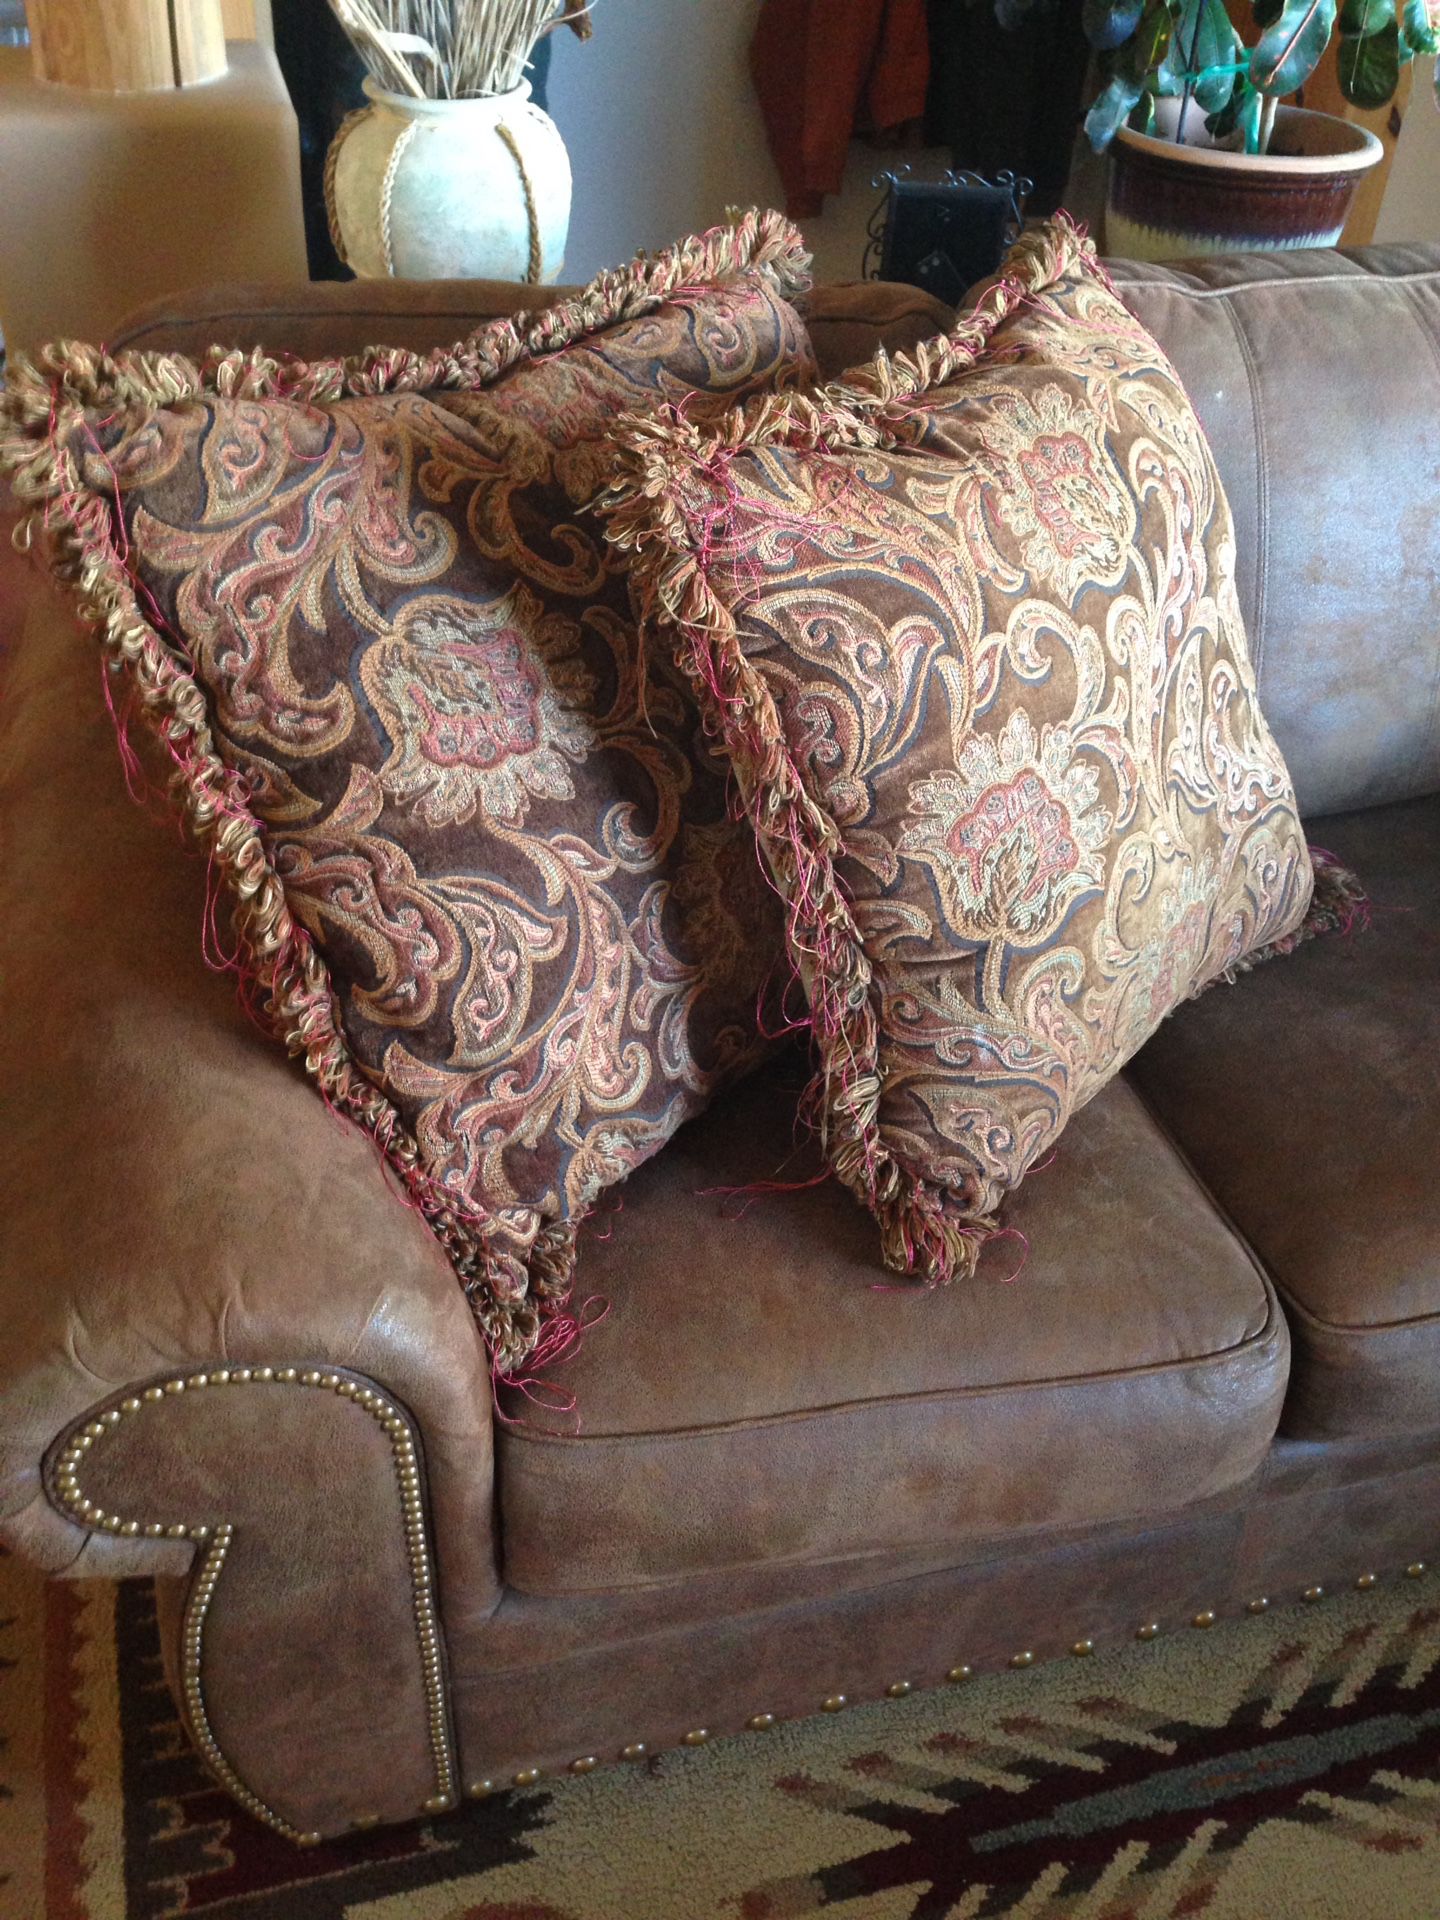 Overstuffed Couch Pillows/Cushions